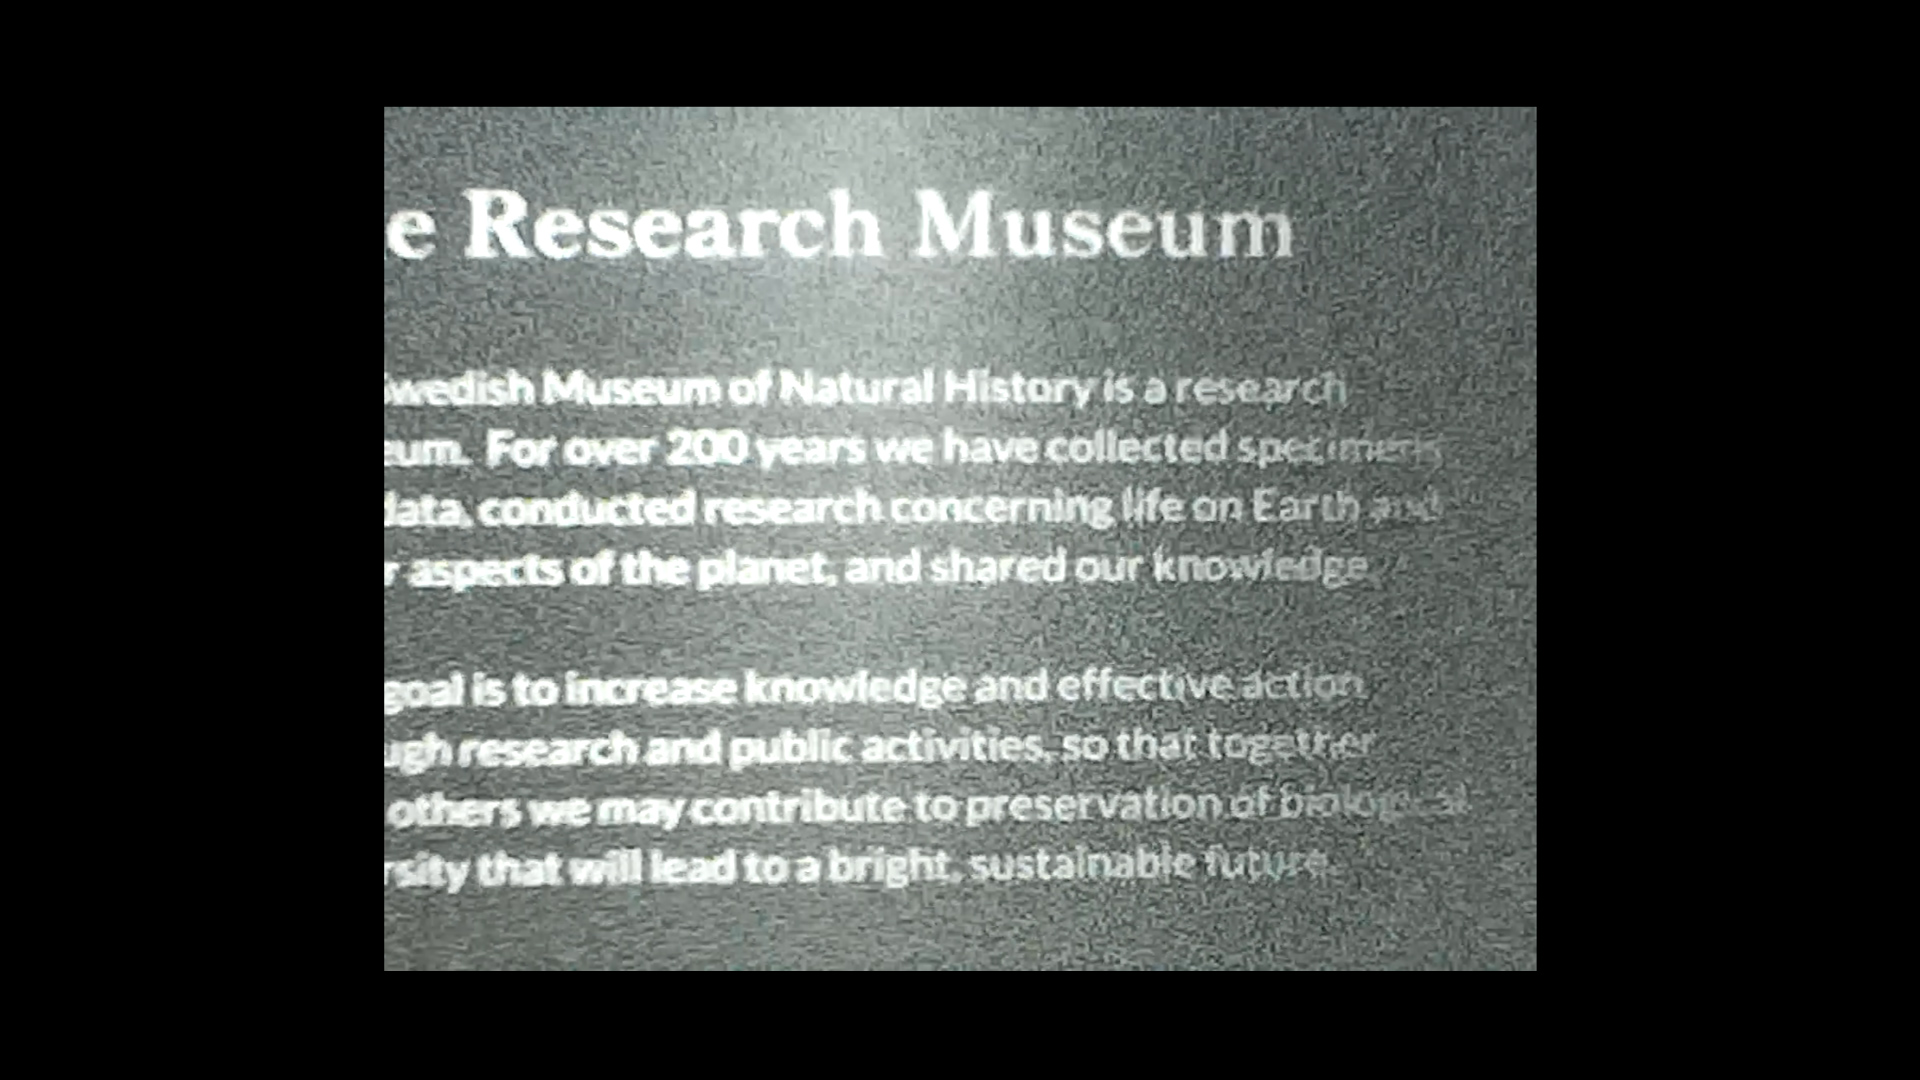 A greyscale image of a museum notice.